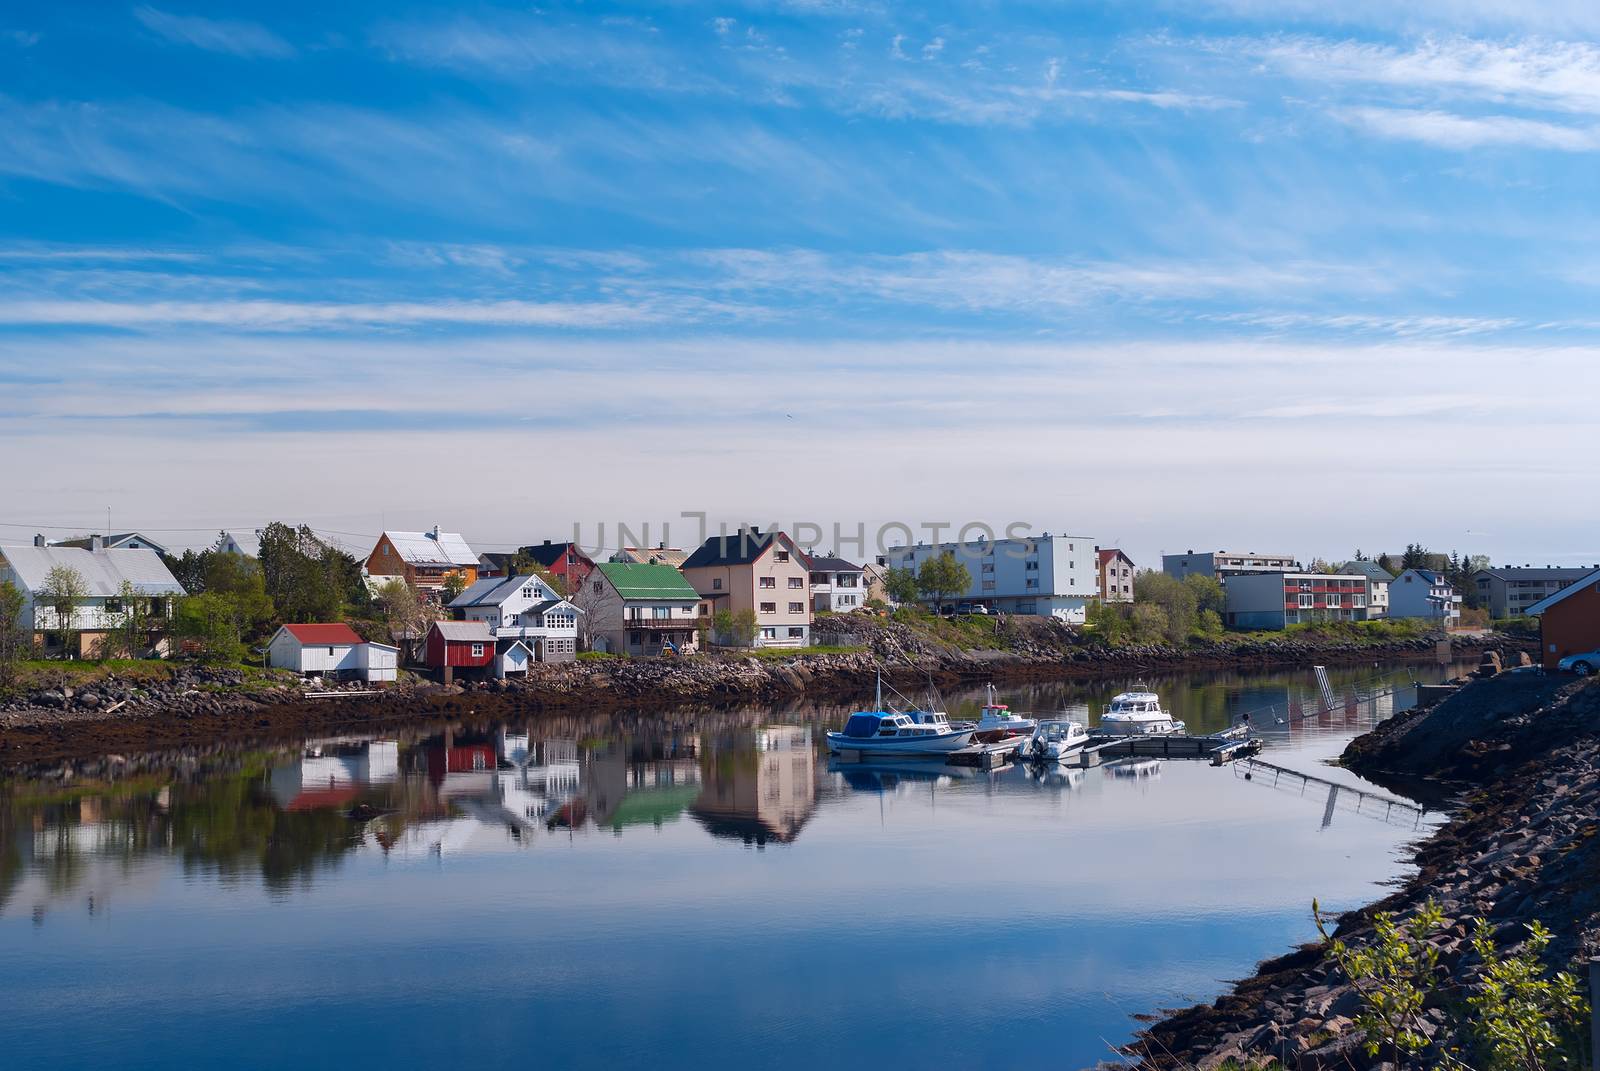 Village on the norwegian island with reflection in water by BIG_TAU